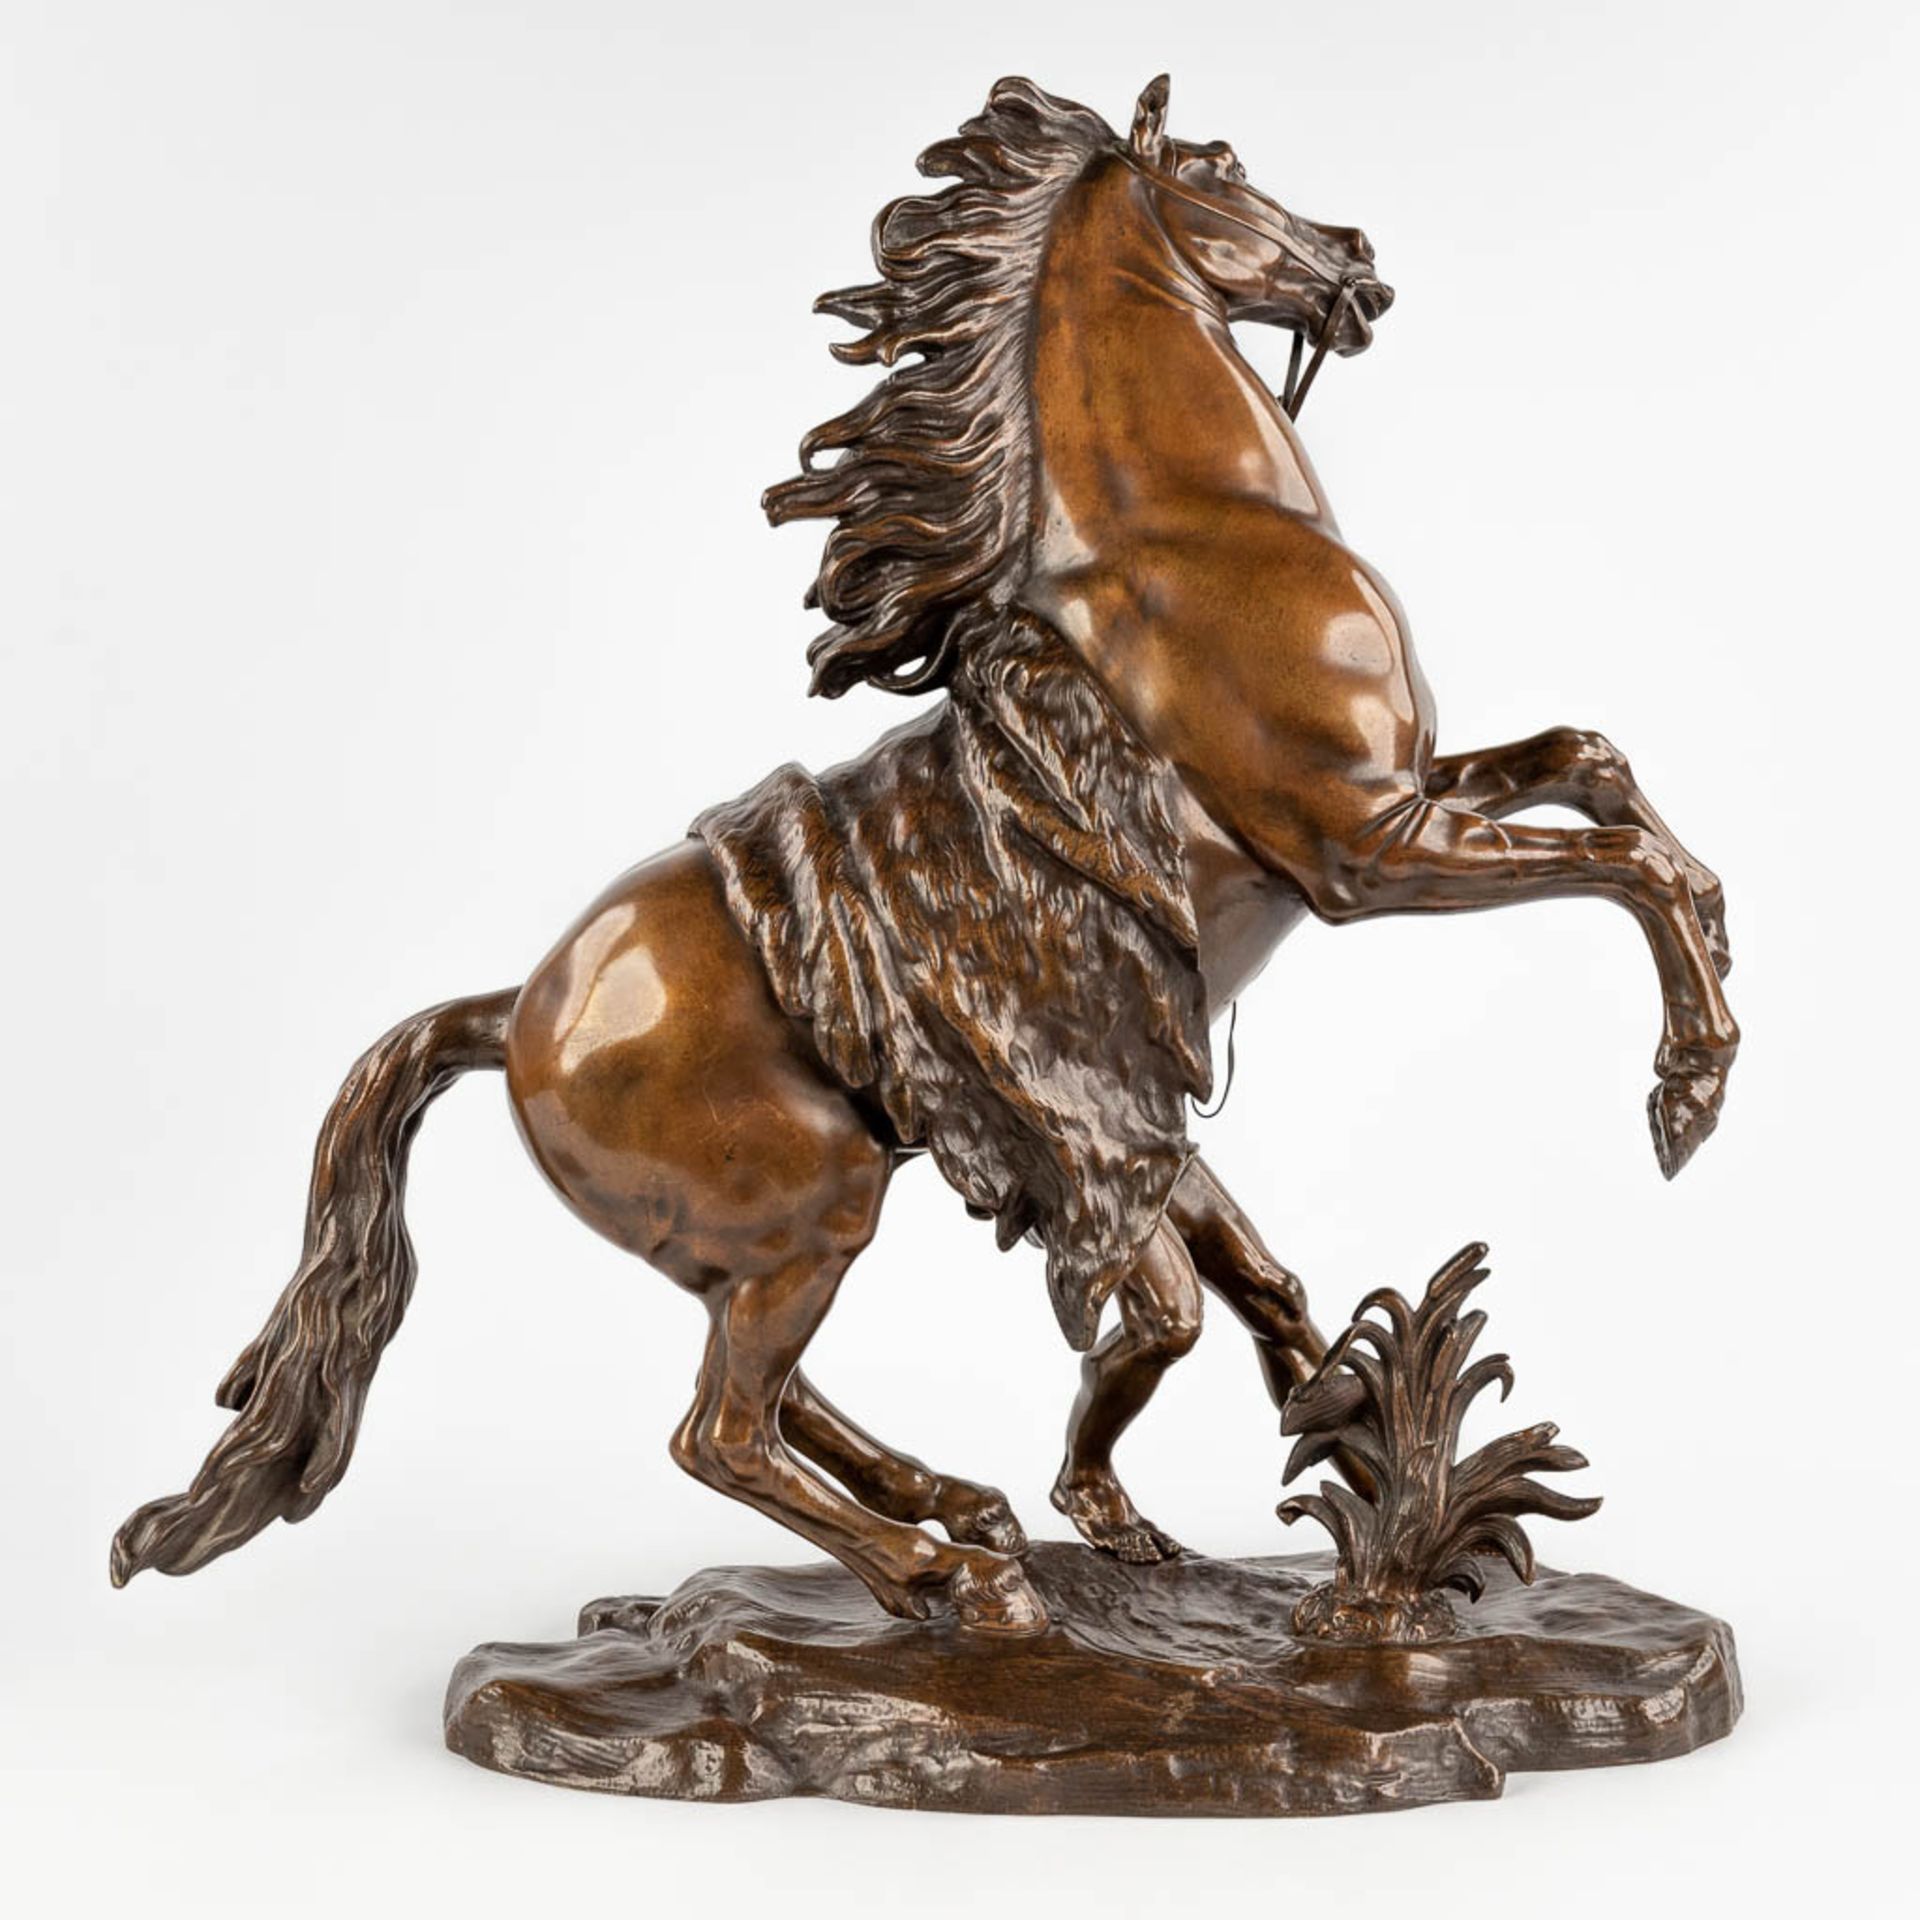 Guillaume I COUSTOU (1677-1746)(after), 'Marly horse' patinated bronze. (D:26 x W:56 x H:58 cm) - Image 6 of 12